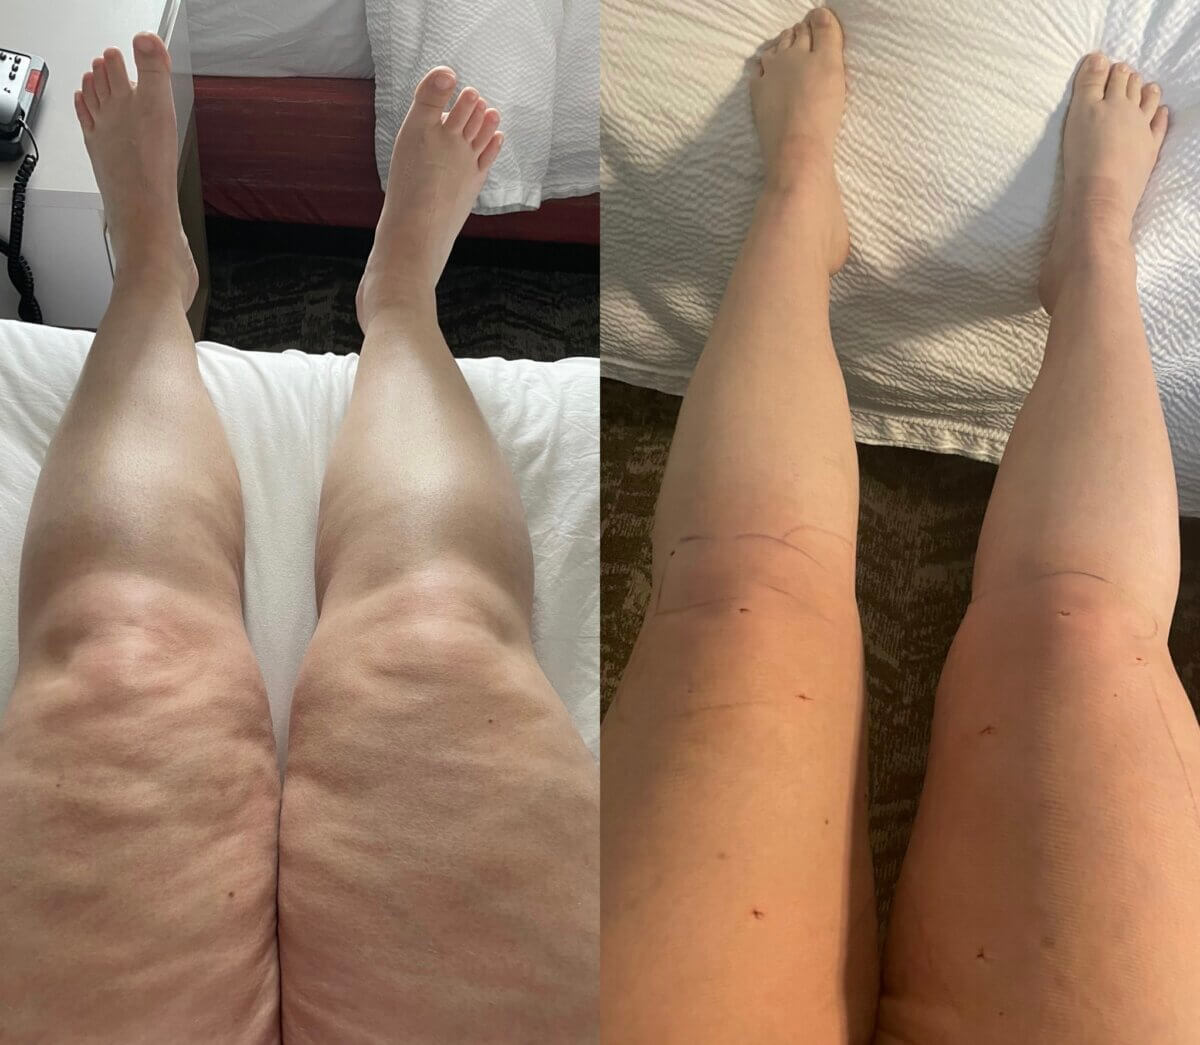 Patient with lipedema shows changes in her legs.